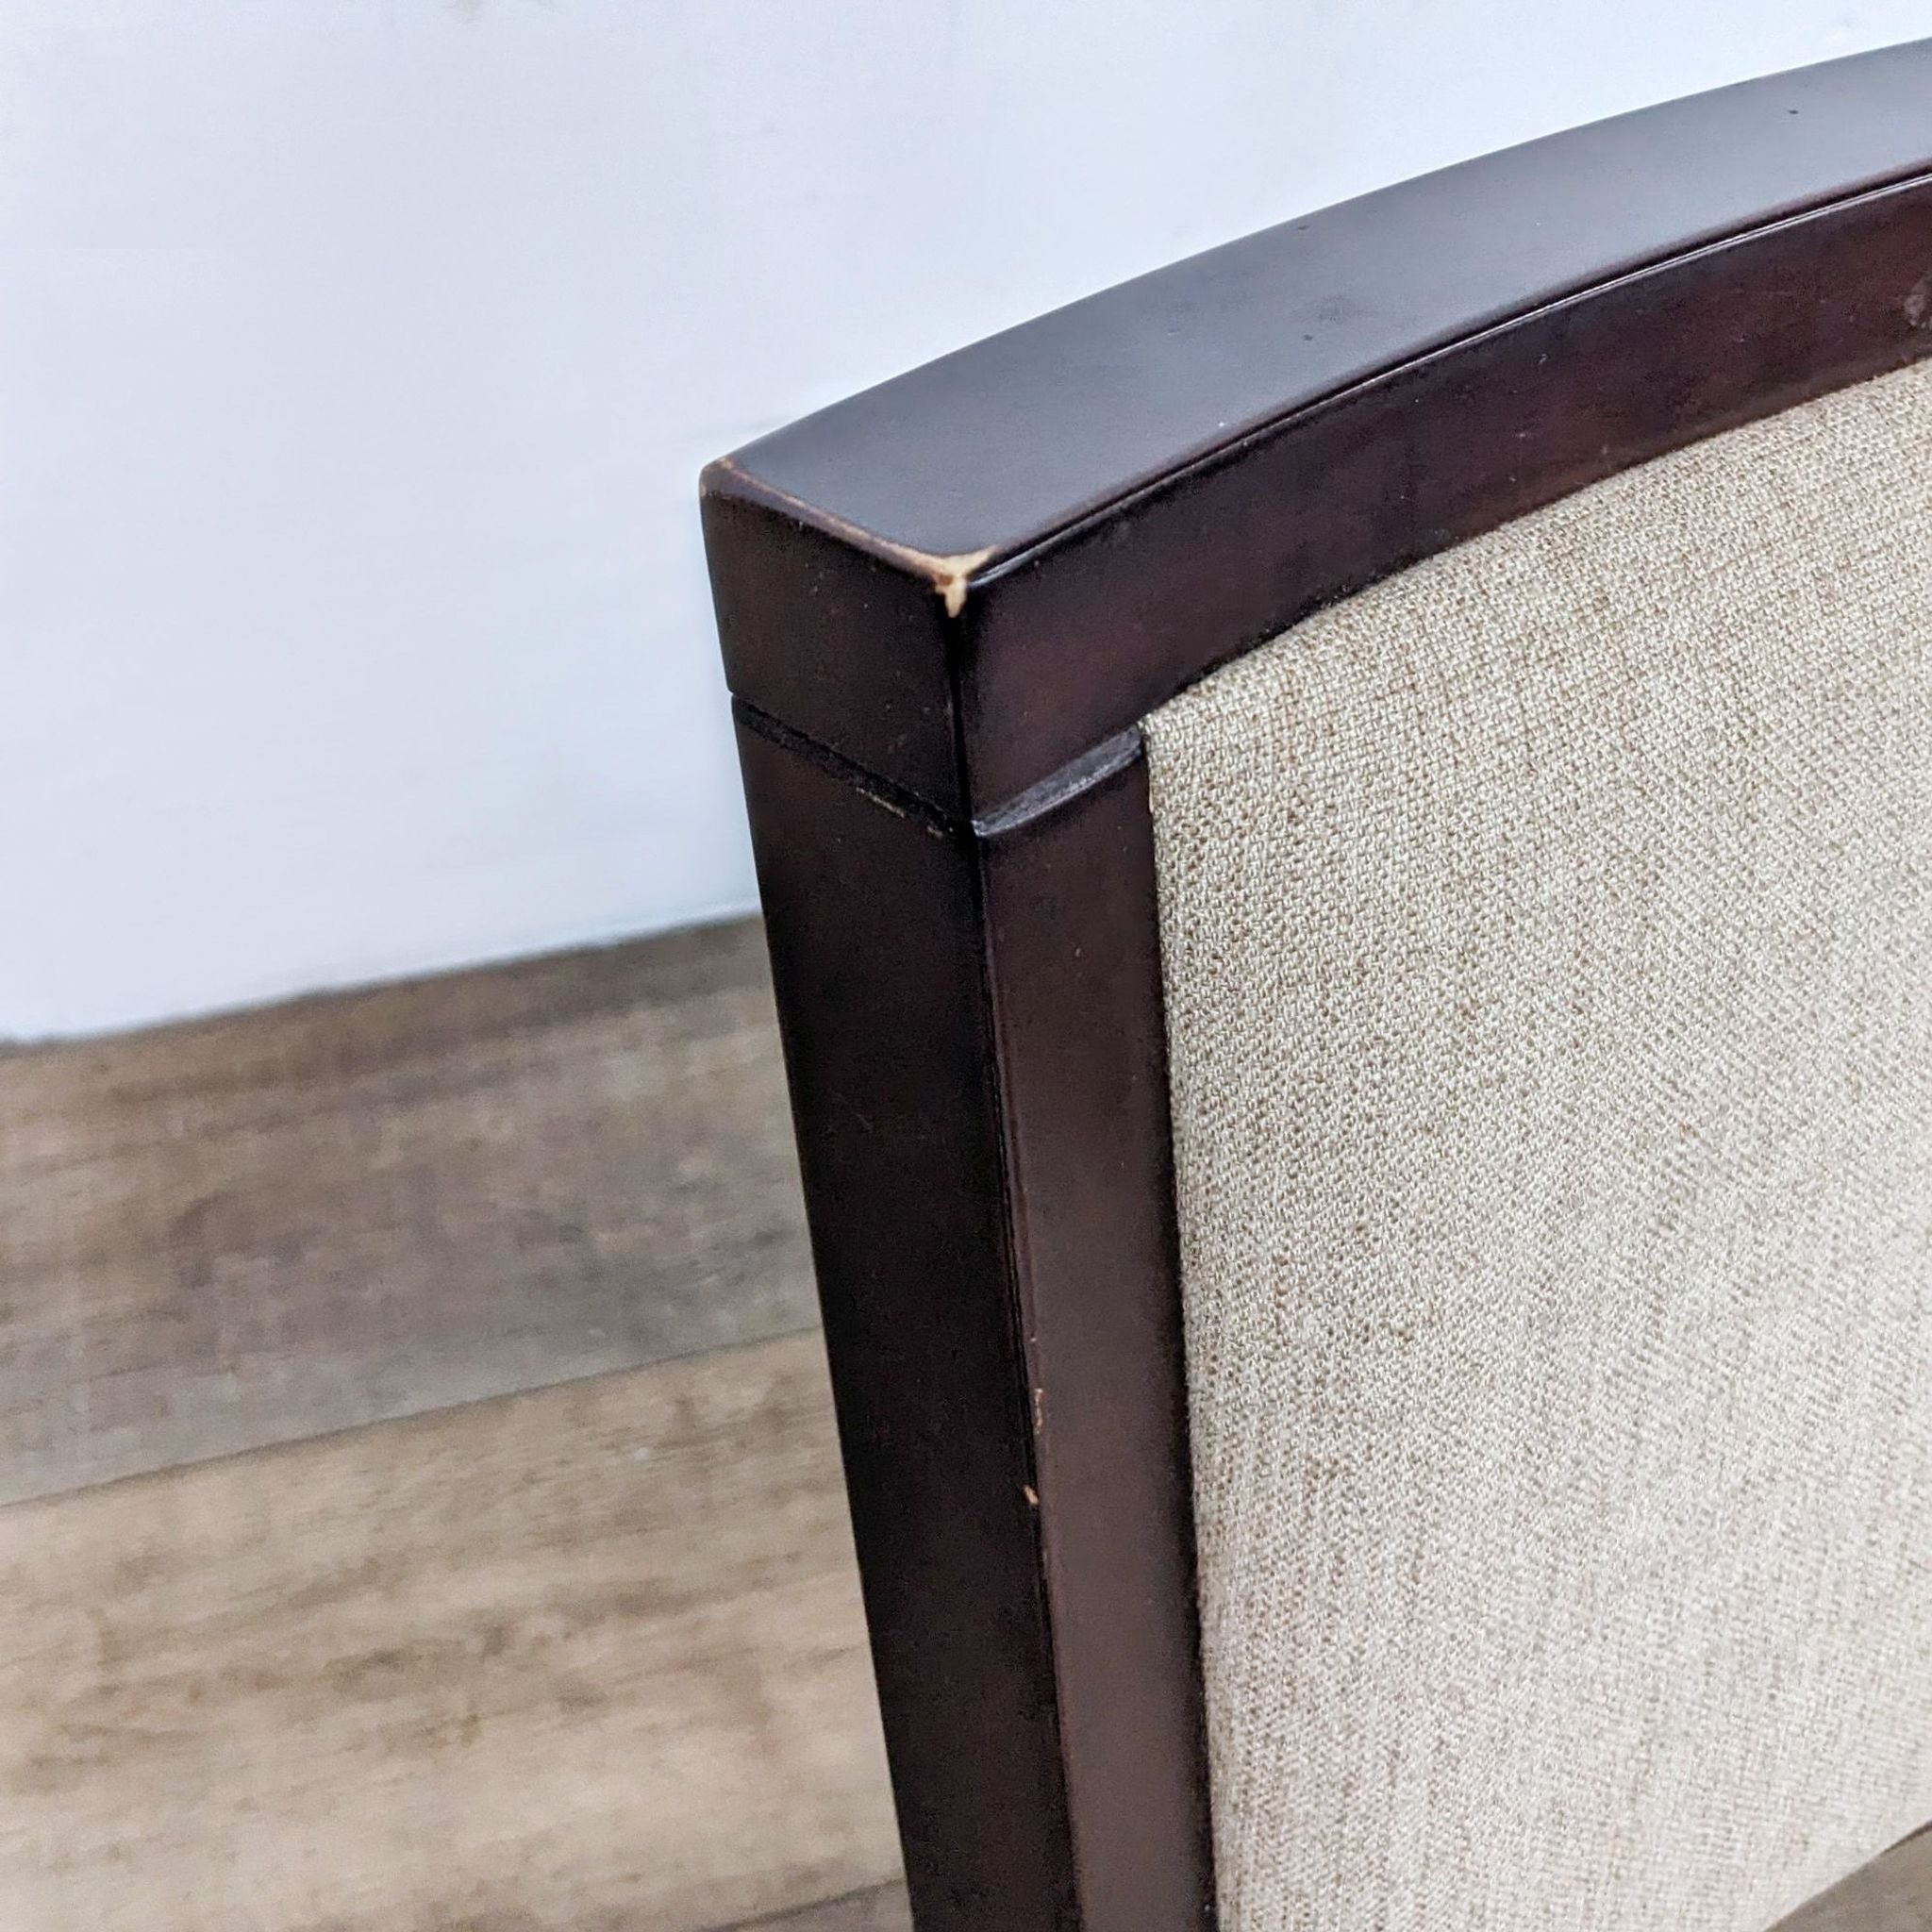 Close-up of a Sitcom dining chair corner with dark wood finish and neutral fabric upholstery.